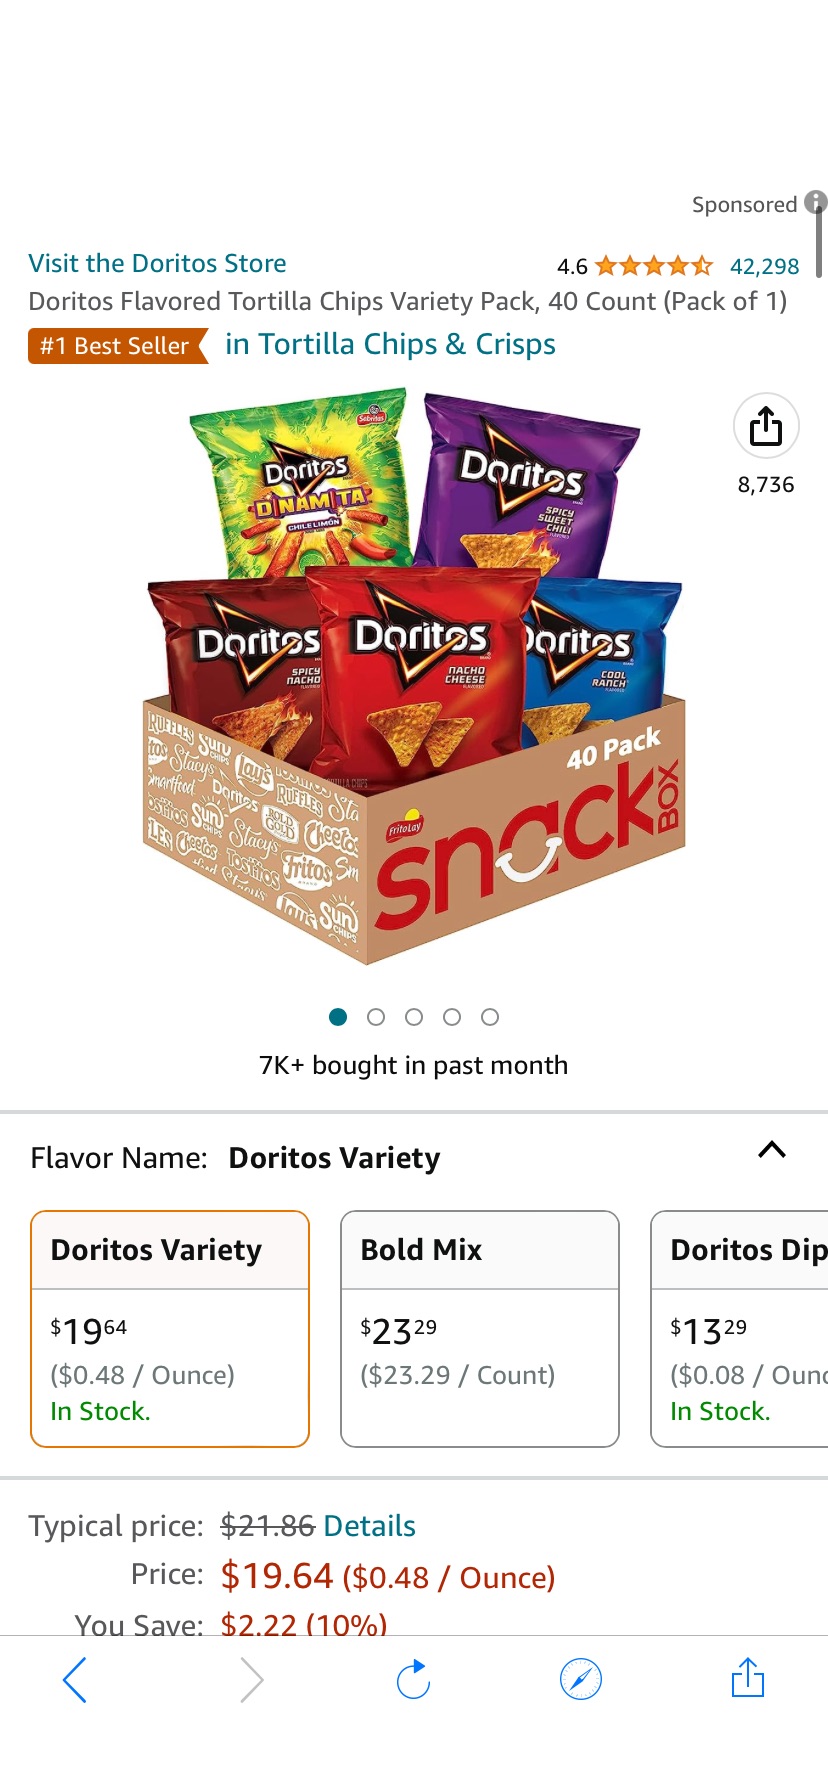 Amazon.com: Doritos 多口味零食Flavored Tortilla Chips Variety Pack, 40 Count (Pack of 1)